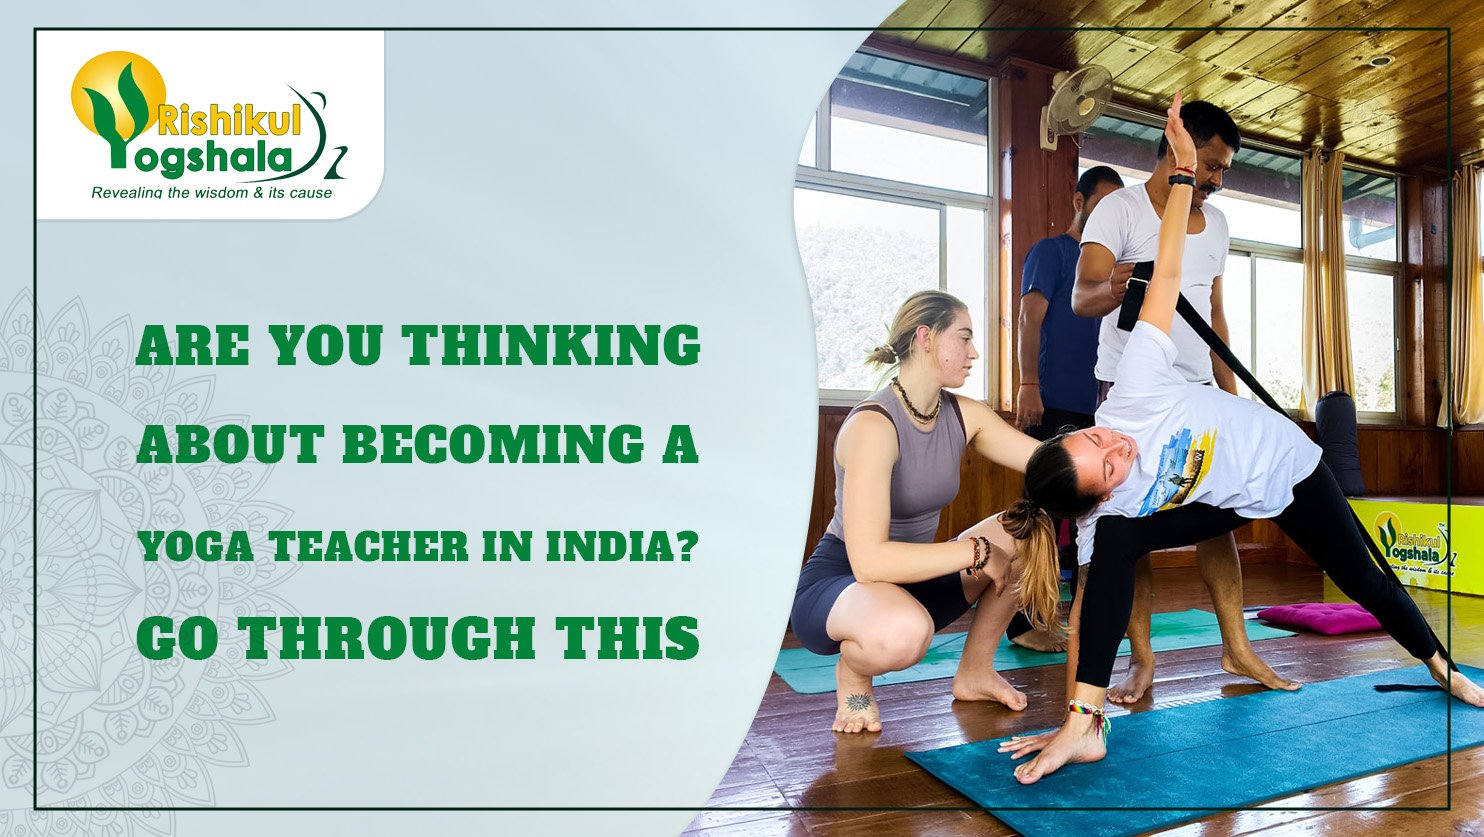 Are You Thinking About Becoming a Yoga Teacher in India? Go Through This